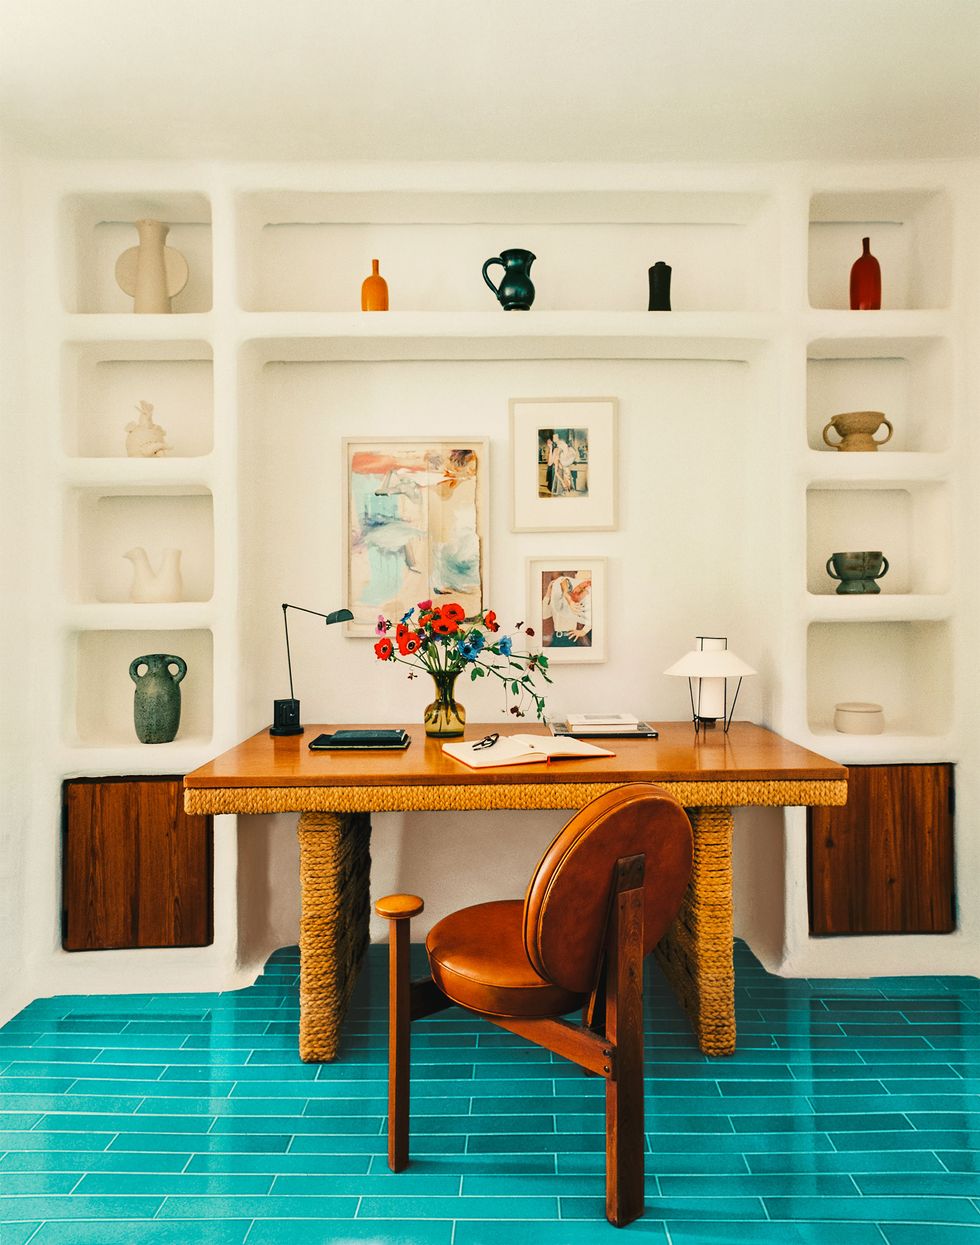 an office area with small artworks above wooden tabletop with legs covered in rattan, wood chair with round leather seat and back, small lamps and a vase on table, inset shelves on either side with objets d'art